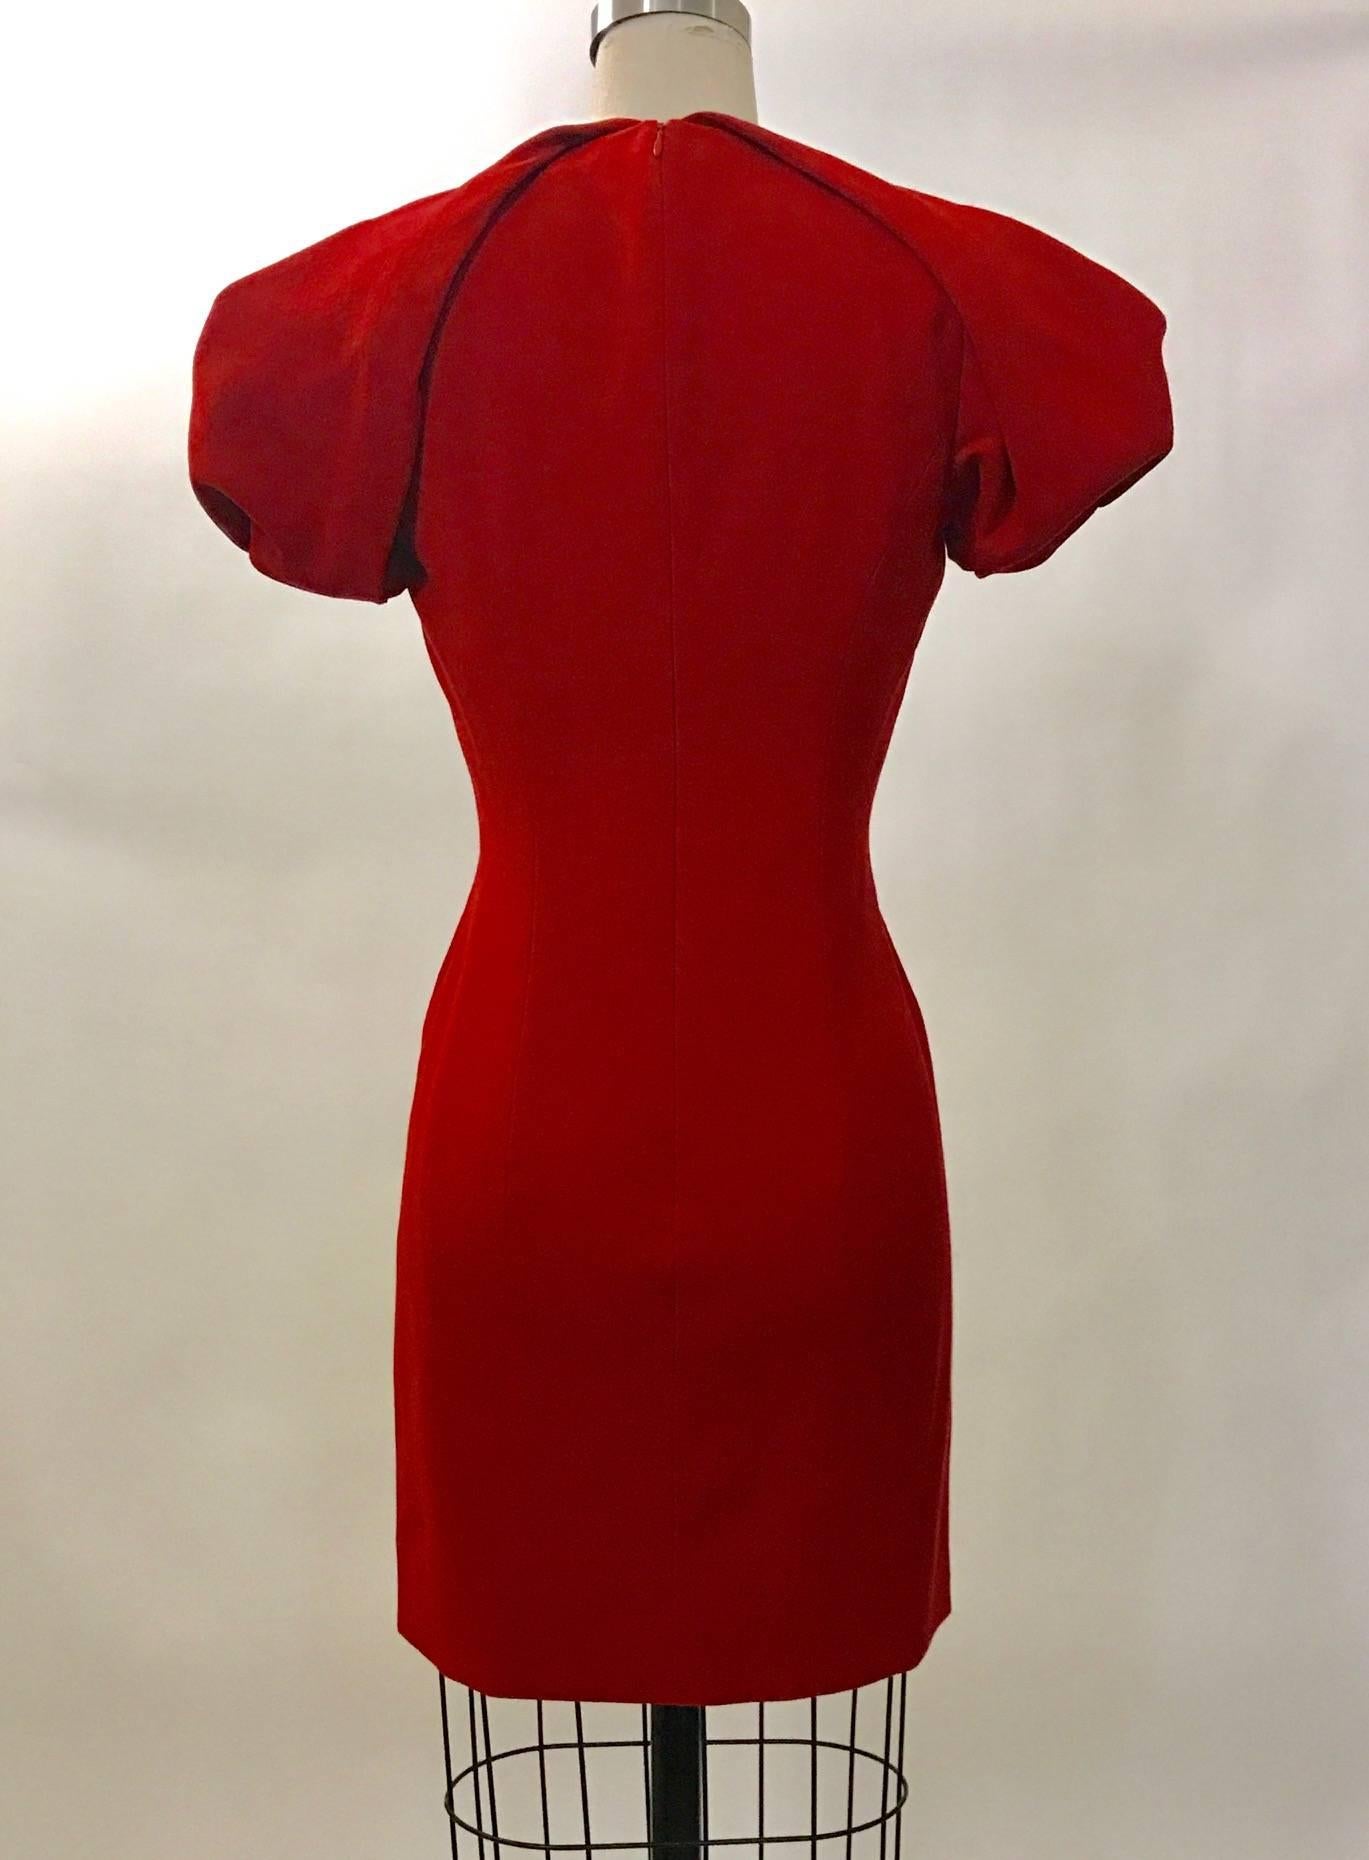 Alexander McQueen light wool crepe fitted v-neck dress in lipstick red with voluminous folded shoulder detail. Back zip and hook and eye. 

100% virgin fleece wool. 
Fully lined in 74% acetate, 26% silk.

Made in Italy.

Size IT 40, approximate US